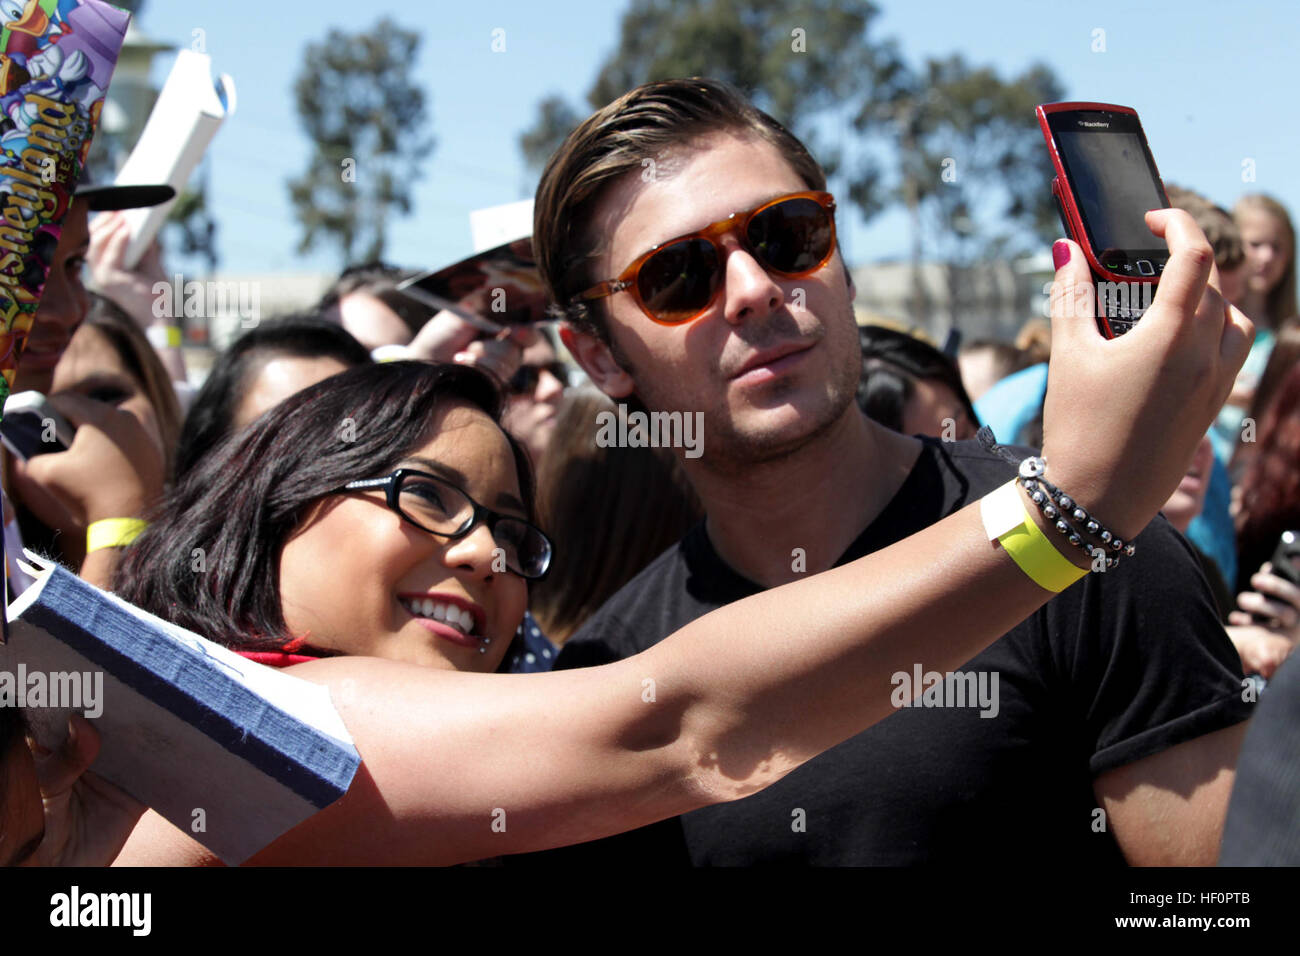 Zac Efron signed autographs and took photos with fans abroad Camp Pendleton before the premier release of his latest film, The Lucky One, at the base Bulldog Box Office movie theater, April 14. The young actor, best known for his role in The High School Musical trilogy, was accompanied by co-star Taylor Schilling and the film's director Scott Hicks. The Lucky One is scheduled for release April 20. Zac Efron at Marine Corps Base Camp Pendleton, CA Stock Photo